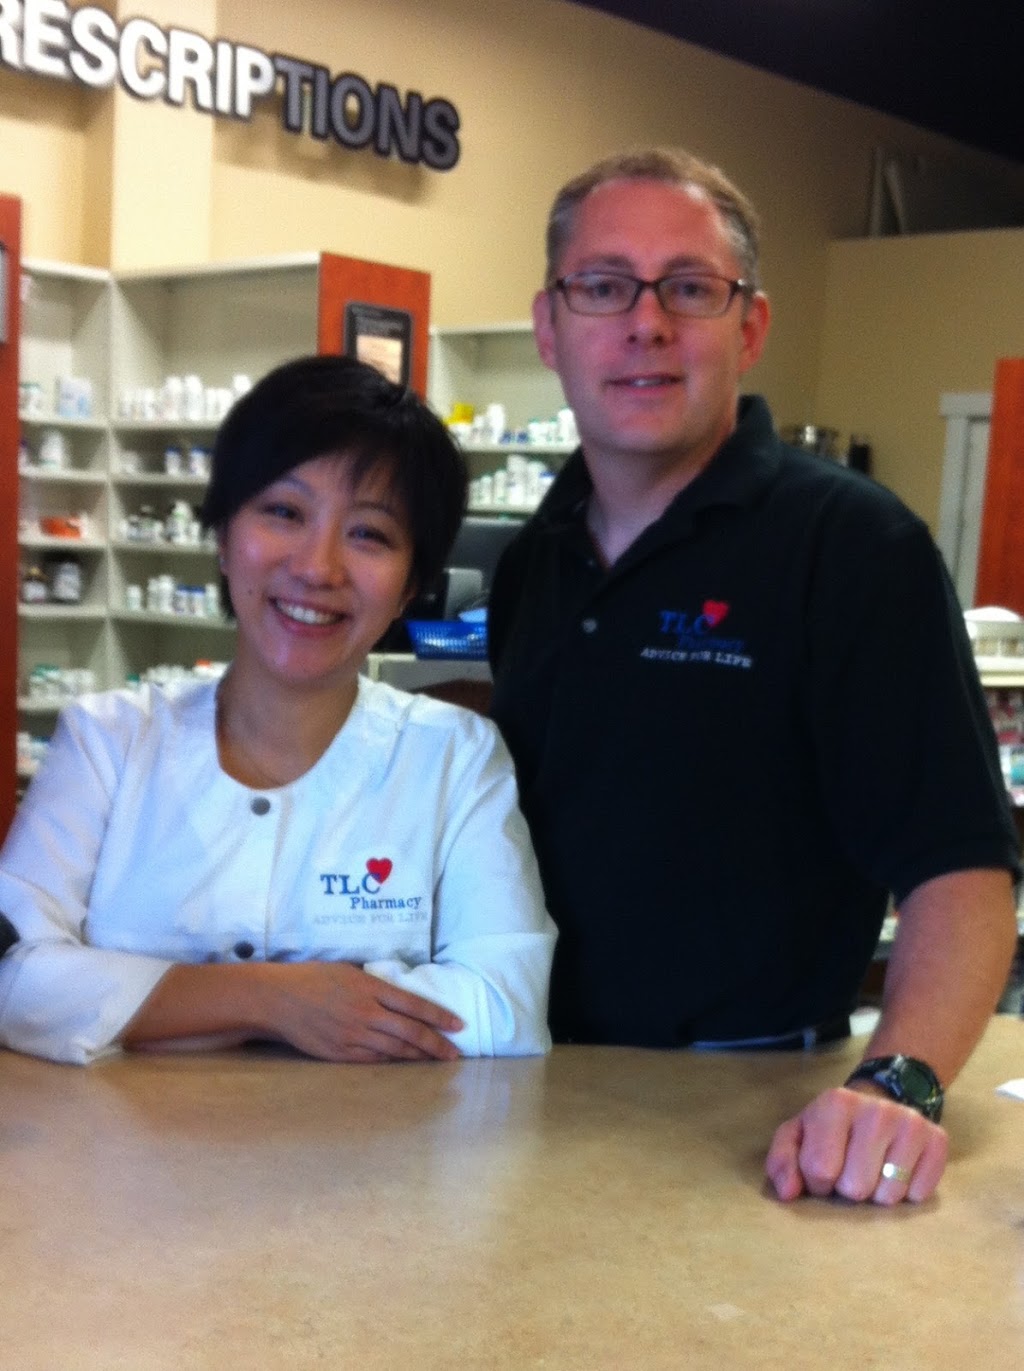 TLC Pharmacy | Town n Country Mall, 1235 Main St N #149, Moose Jaw, SK S6H 6M4, Canada | Phone: (306) 972-7200